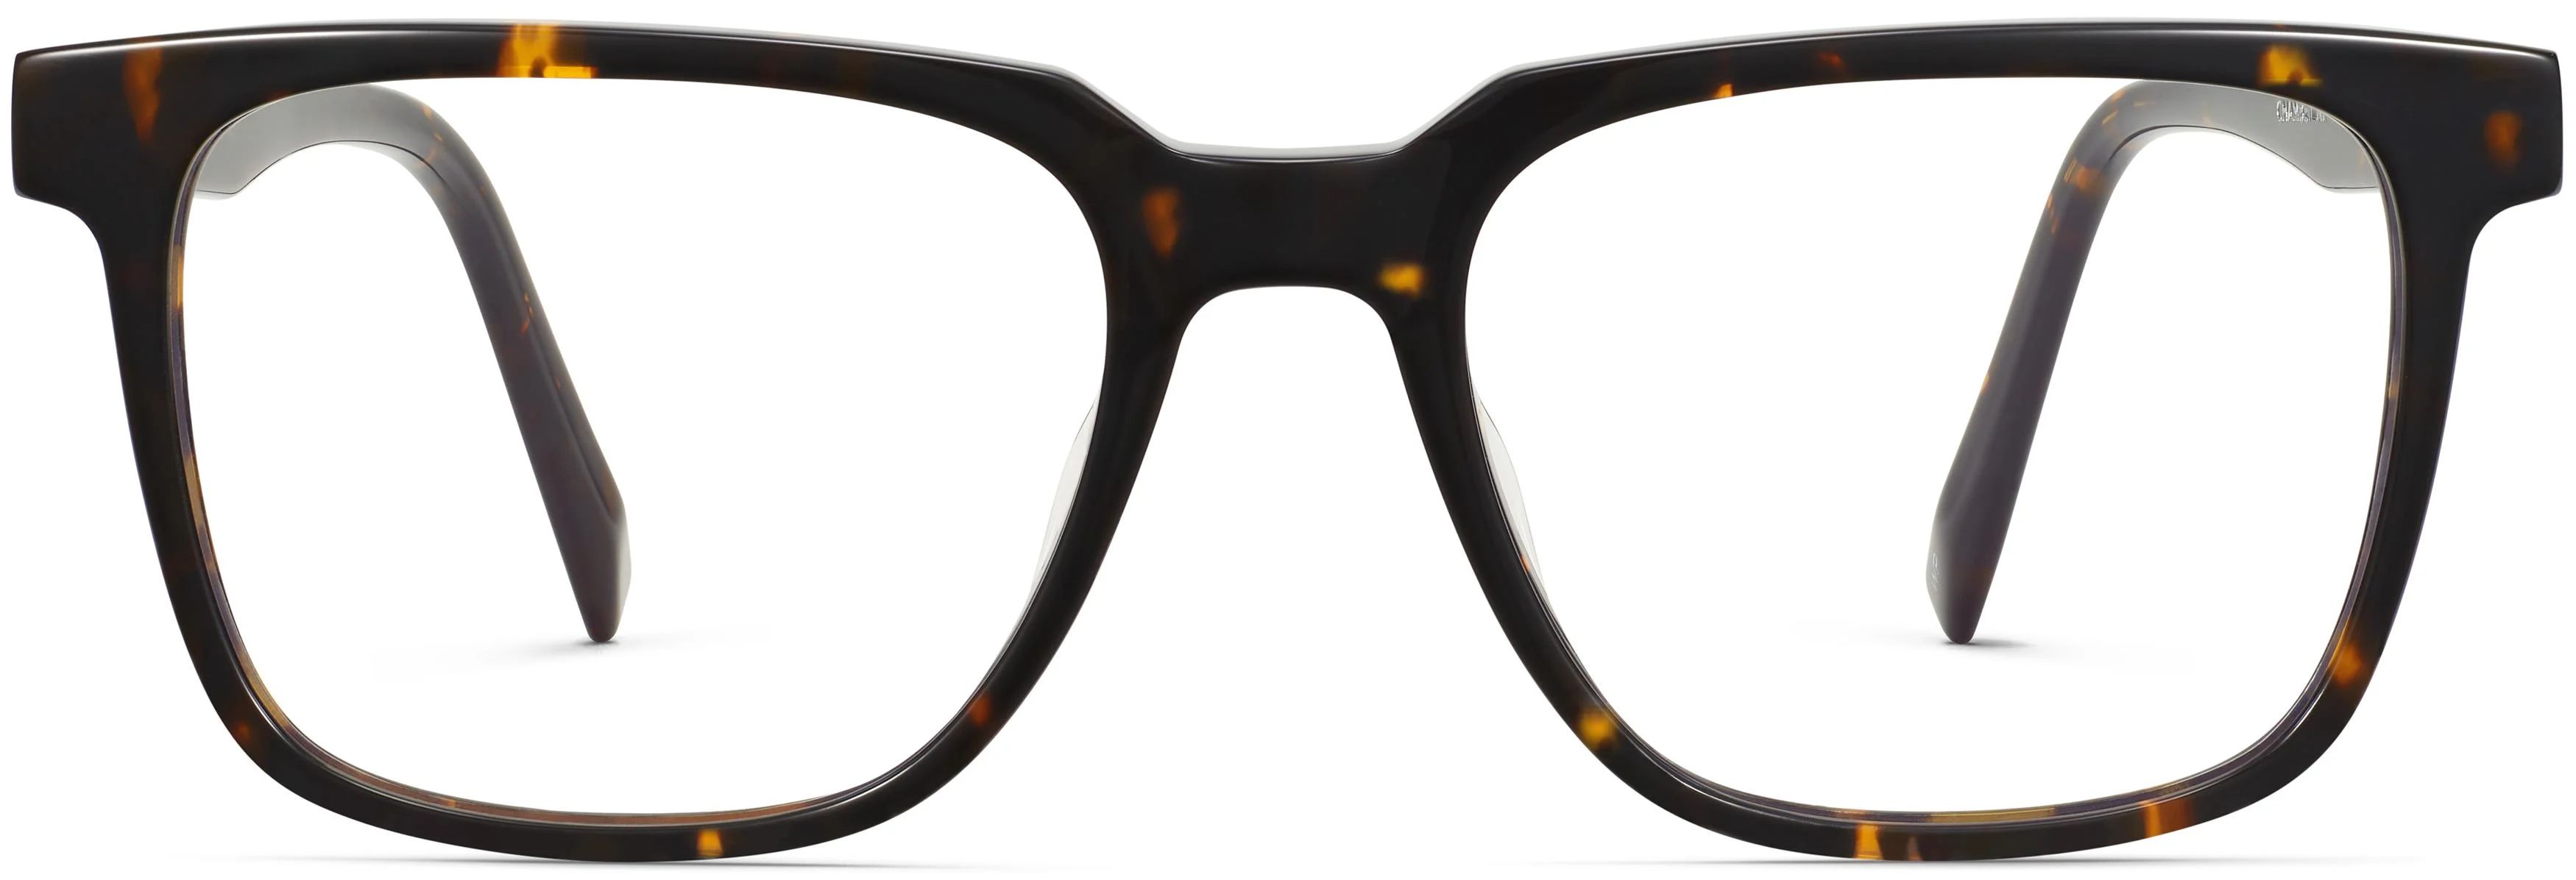 Chamberlain Eyeglasses in Whiskey Tortoise | Warby Parker | Warby Parker (US)